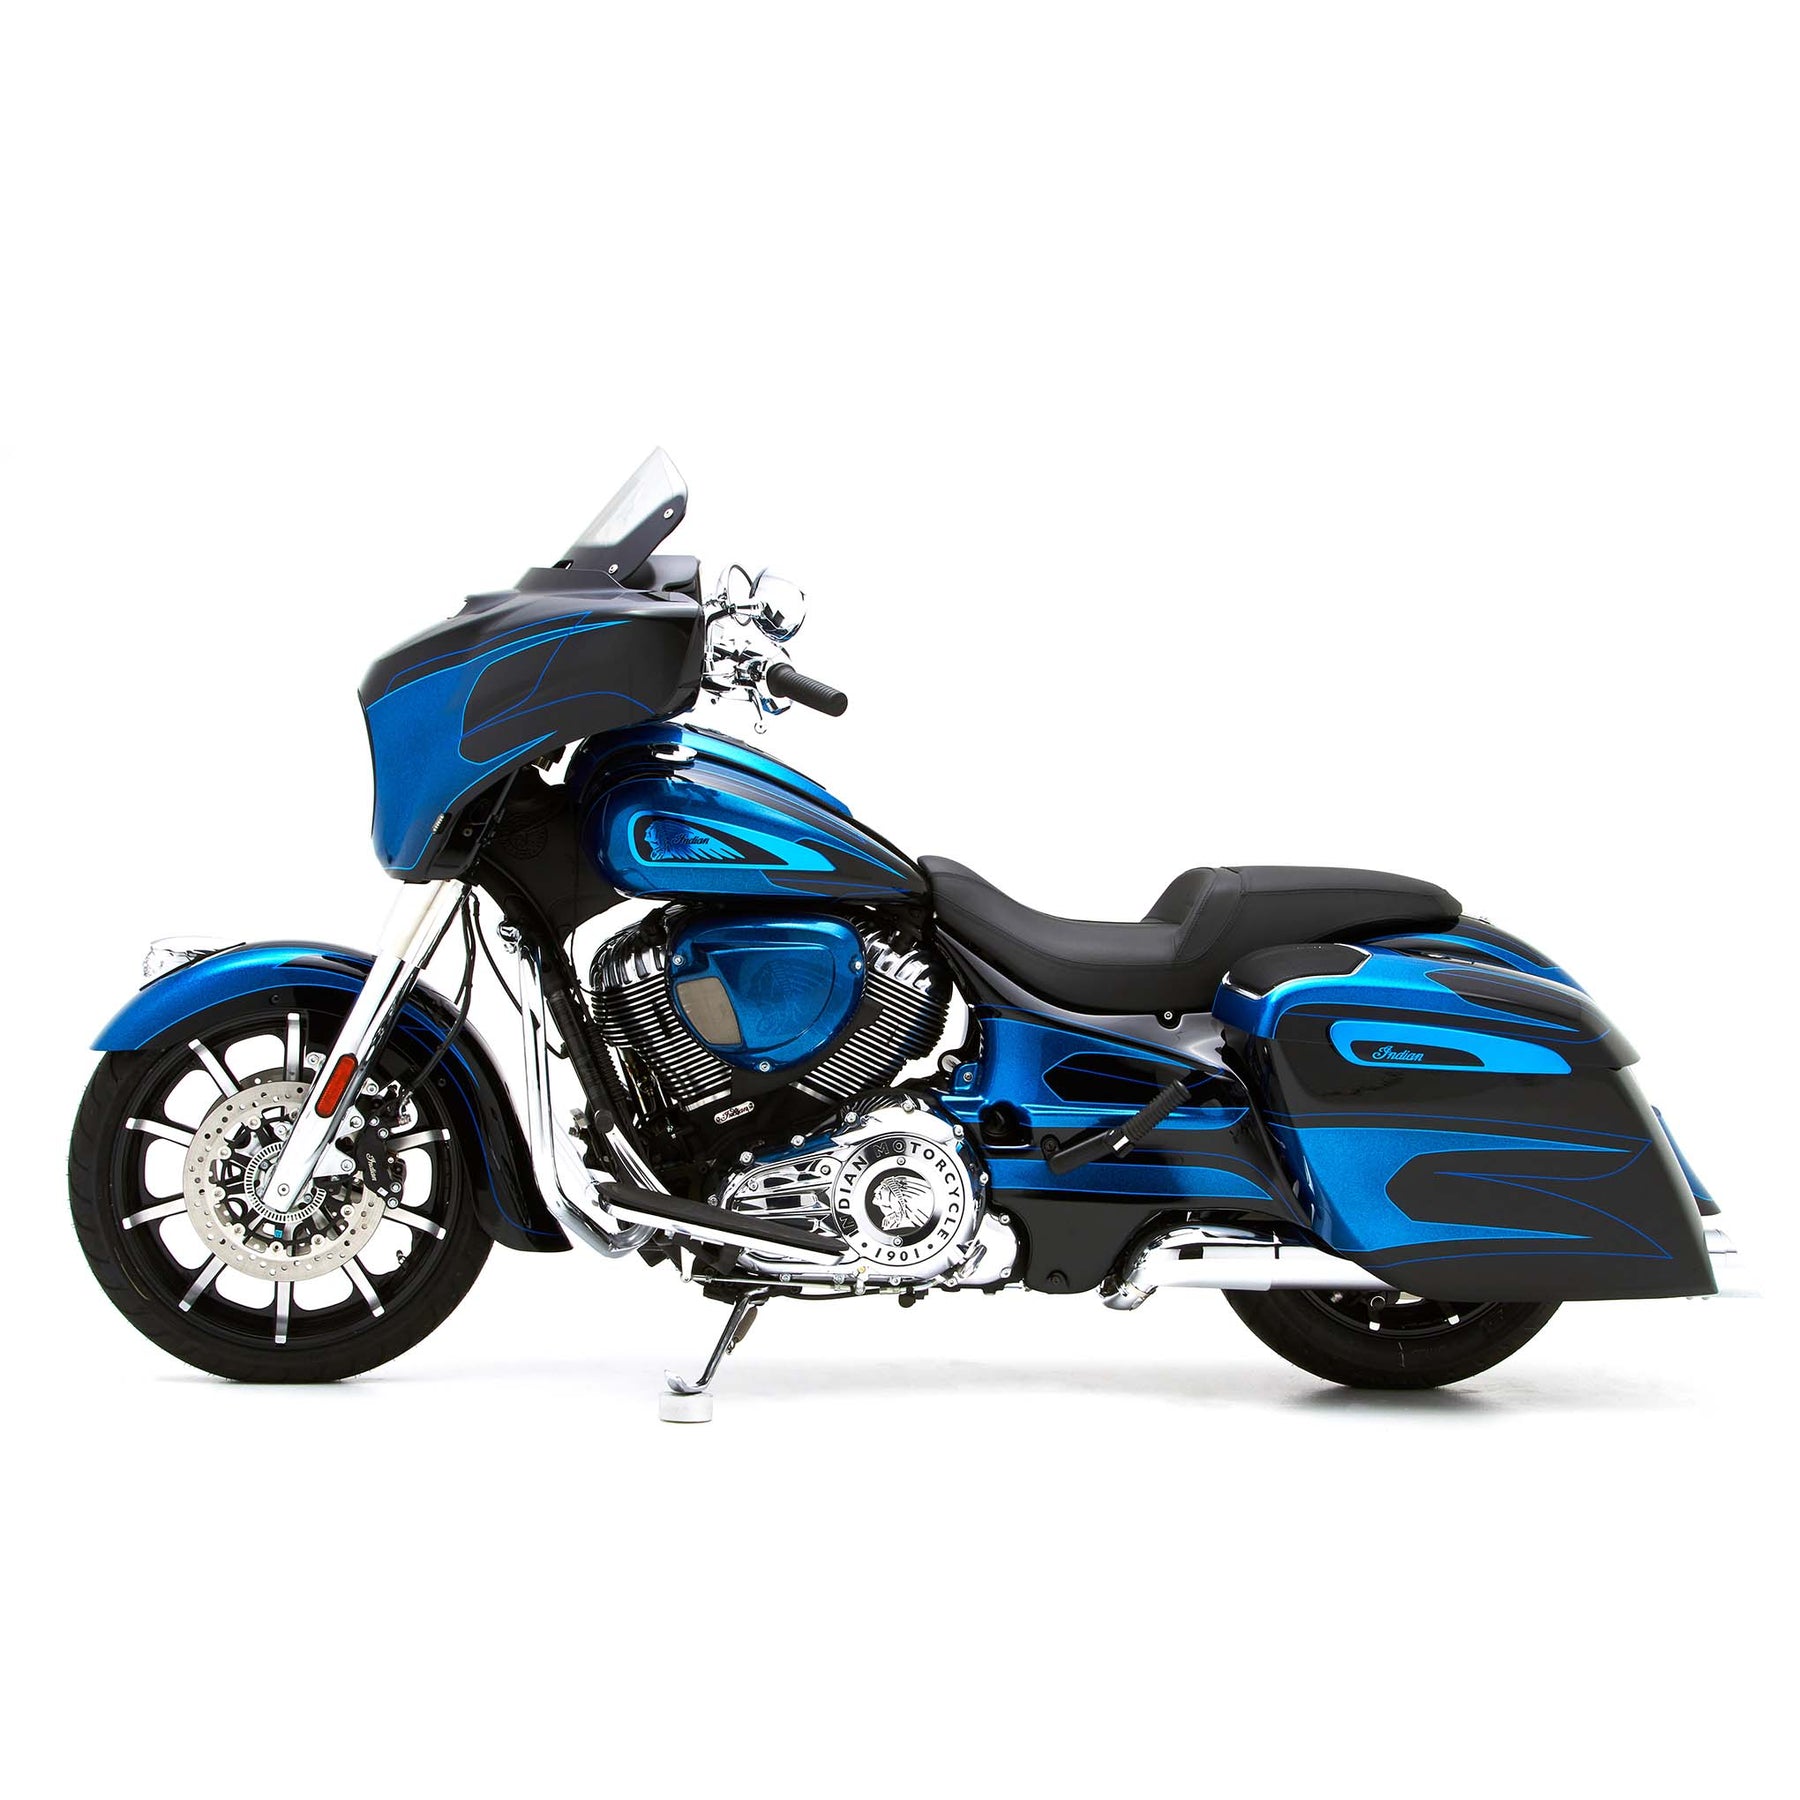 Reytelo Bag Extensions For Indian® 2019-2023 Chieftain Limited, Dark Horse and Roadmaster Motorcycles